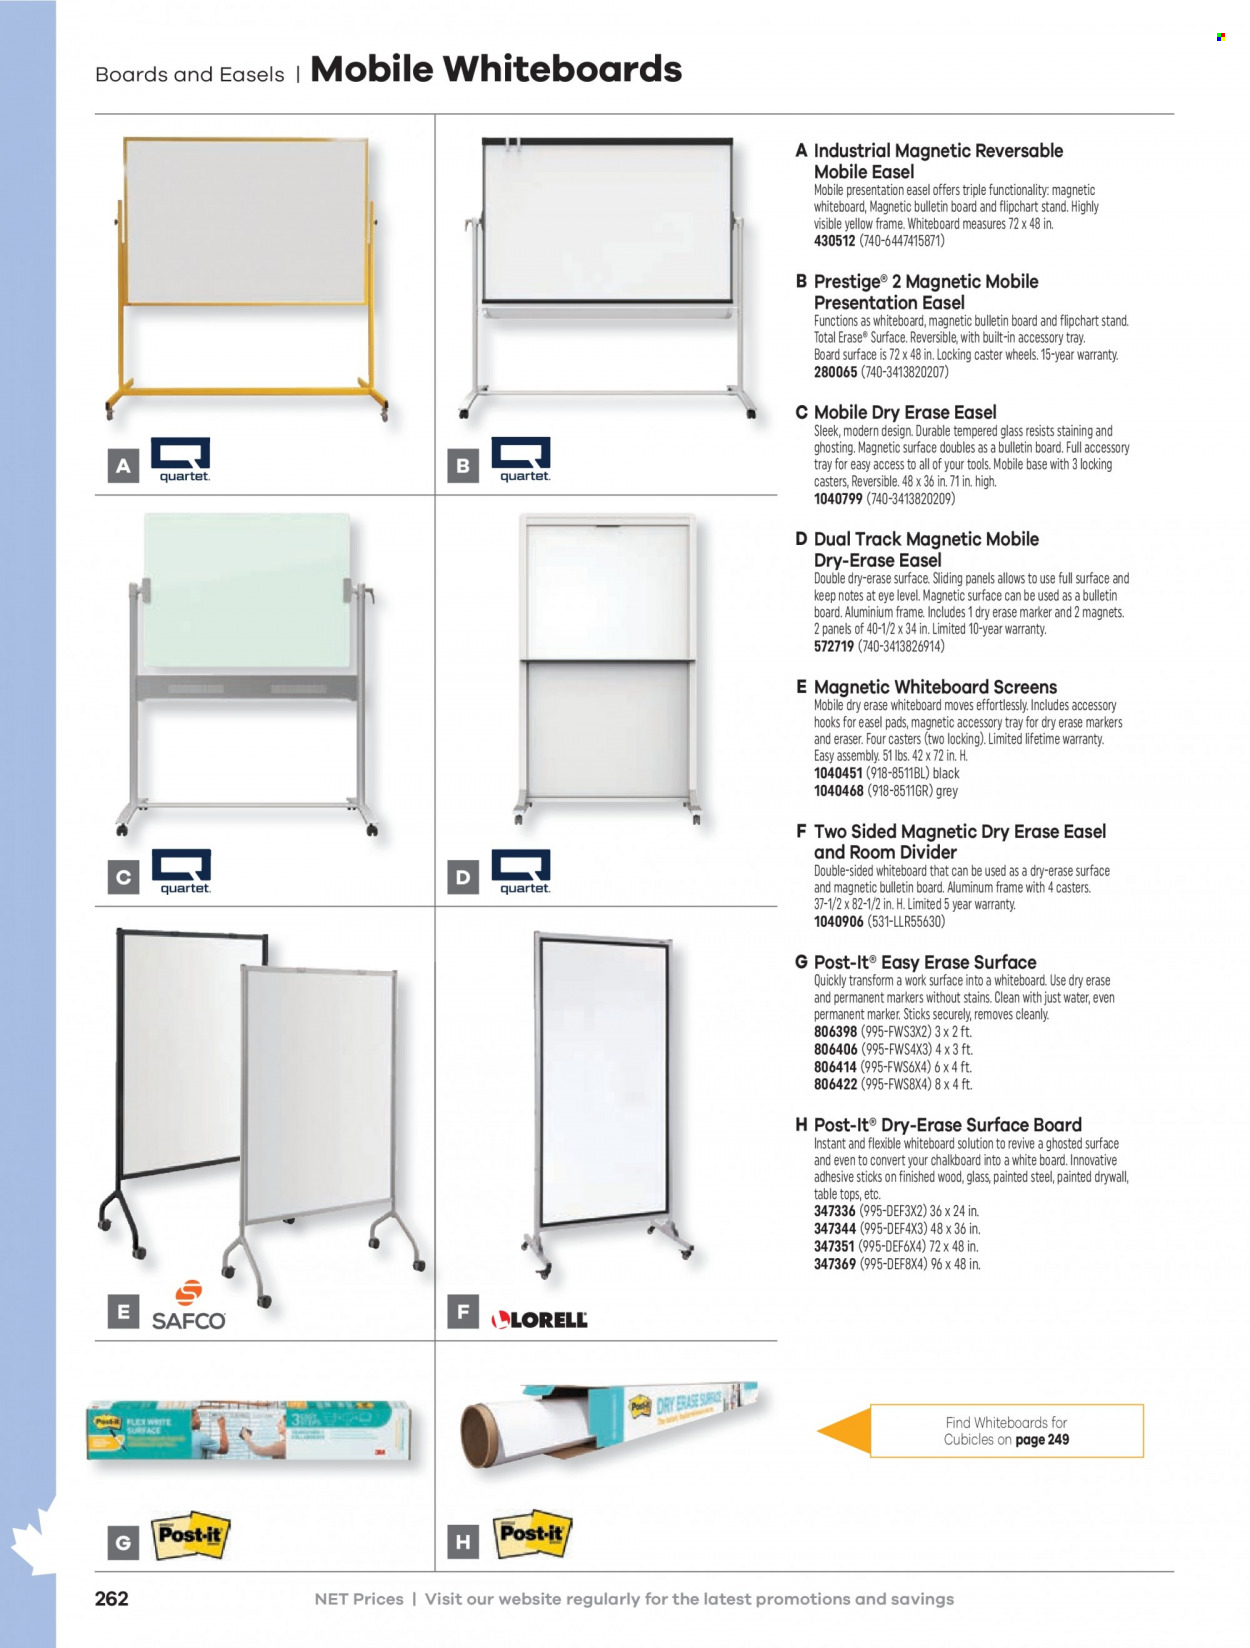 thumbnail - Hamster Flyer - Sales products - wipes, chalkboard, whiteboard, marker, eraser, easel, Post-It, easel pad. Page 264.